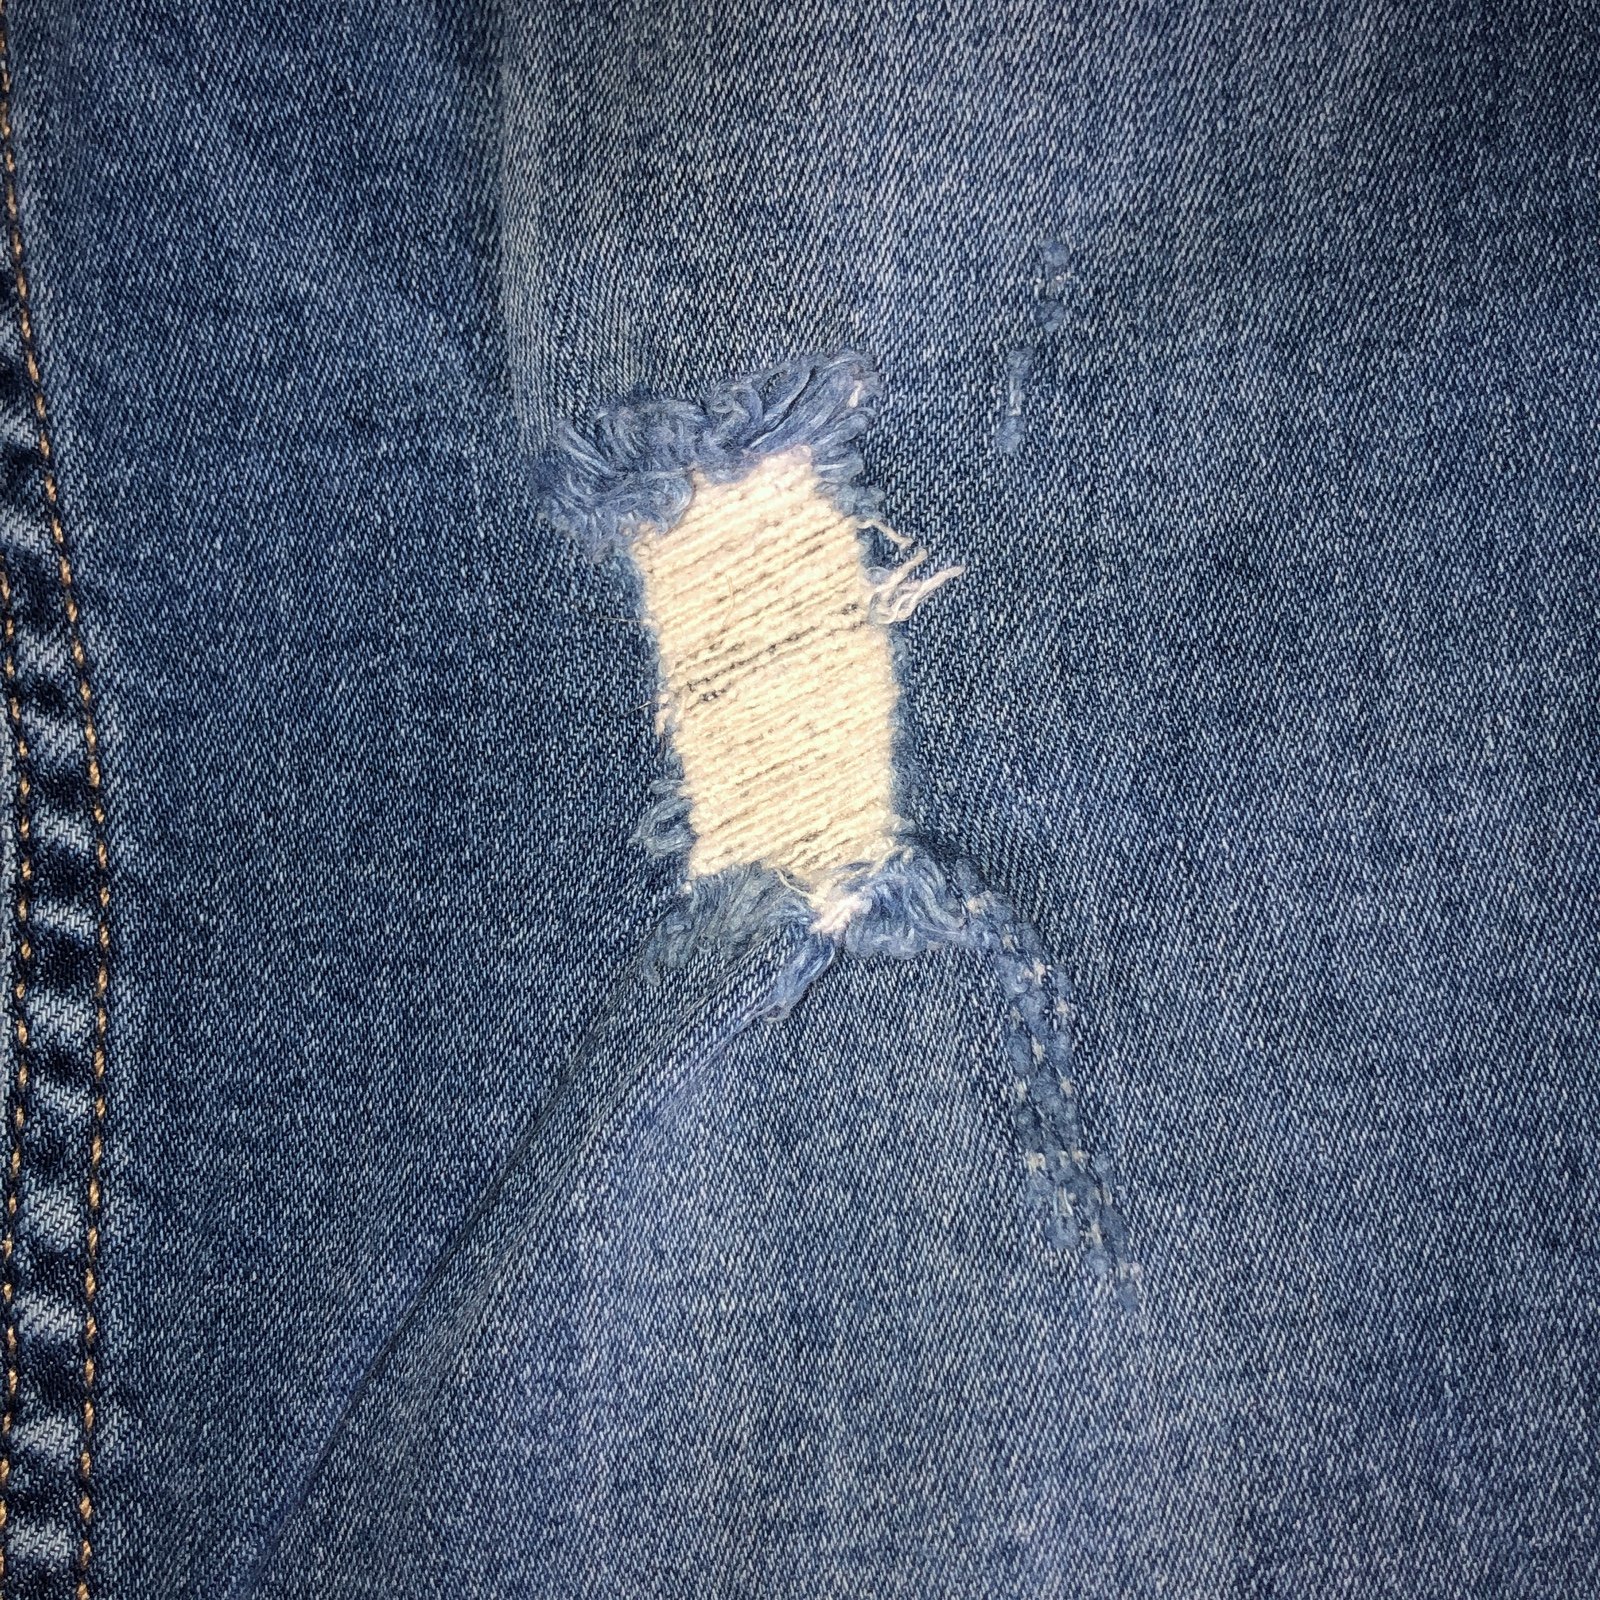 Affordable Free People jeans oQHq21tN7 Outlet Store